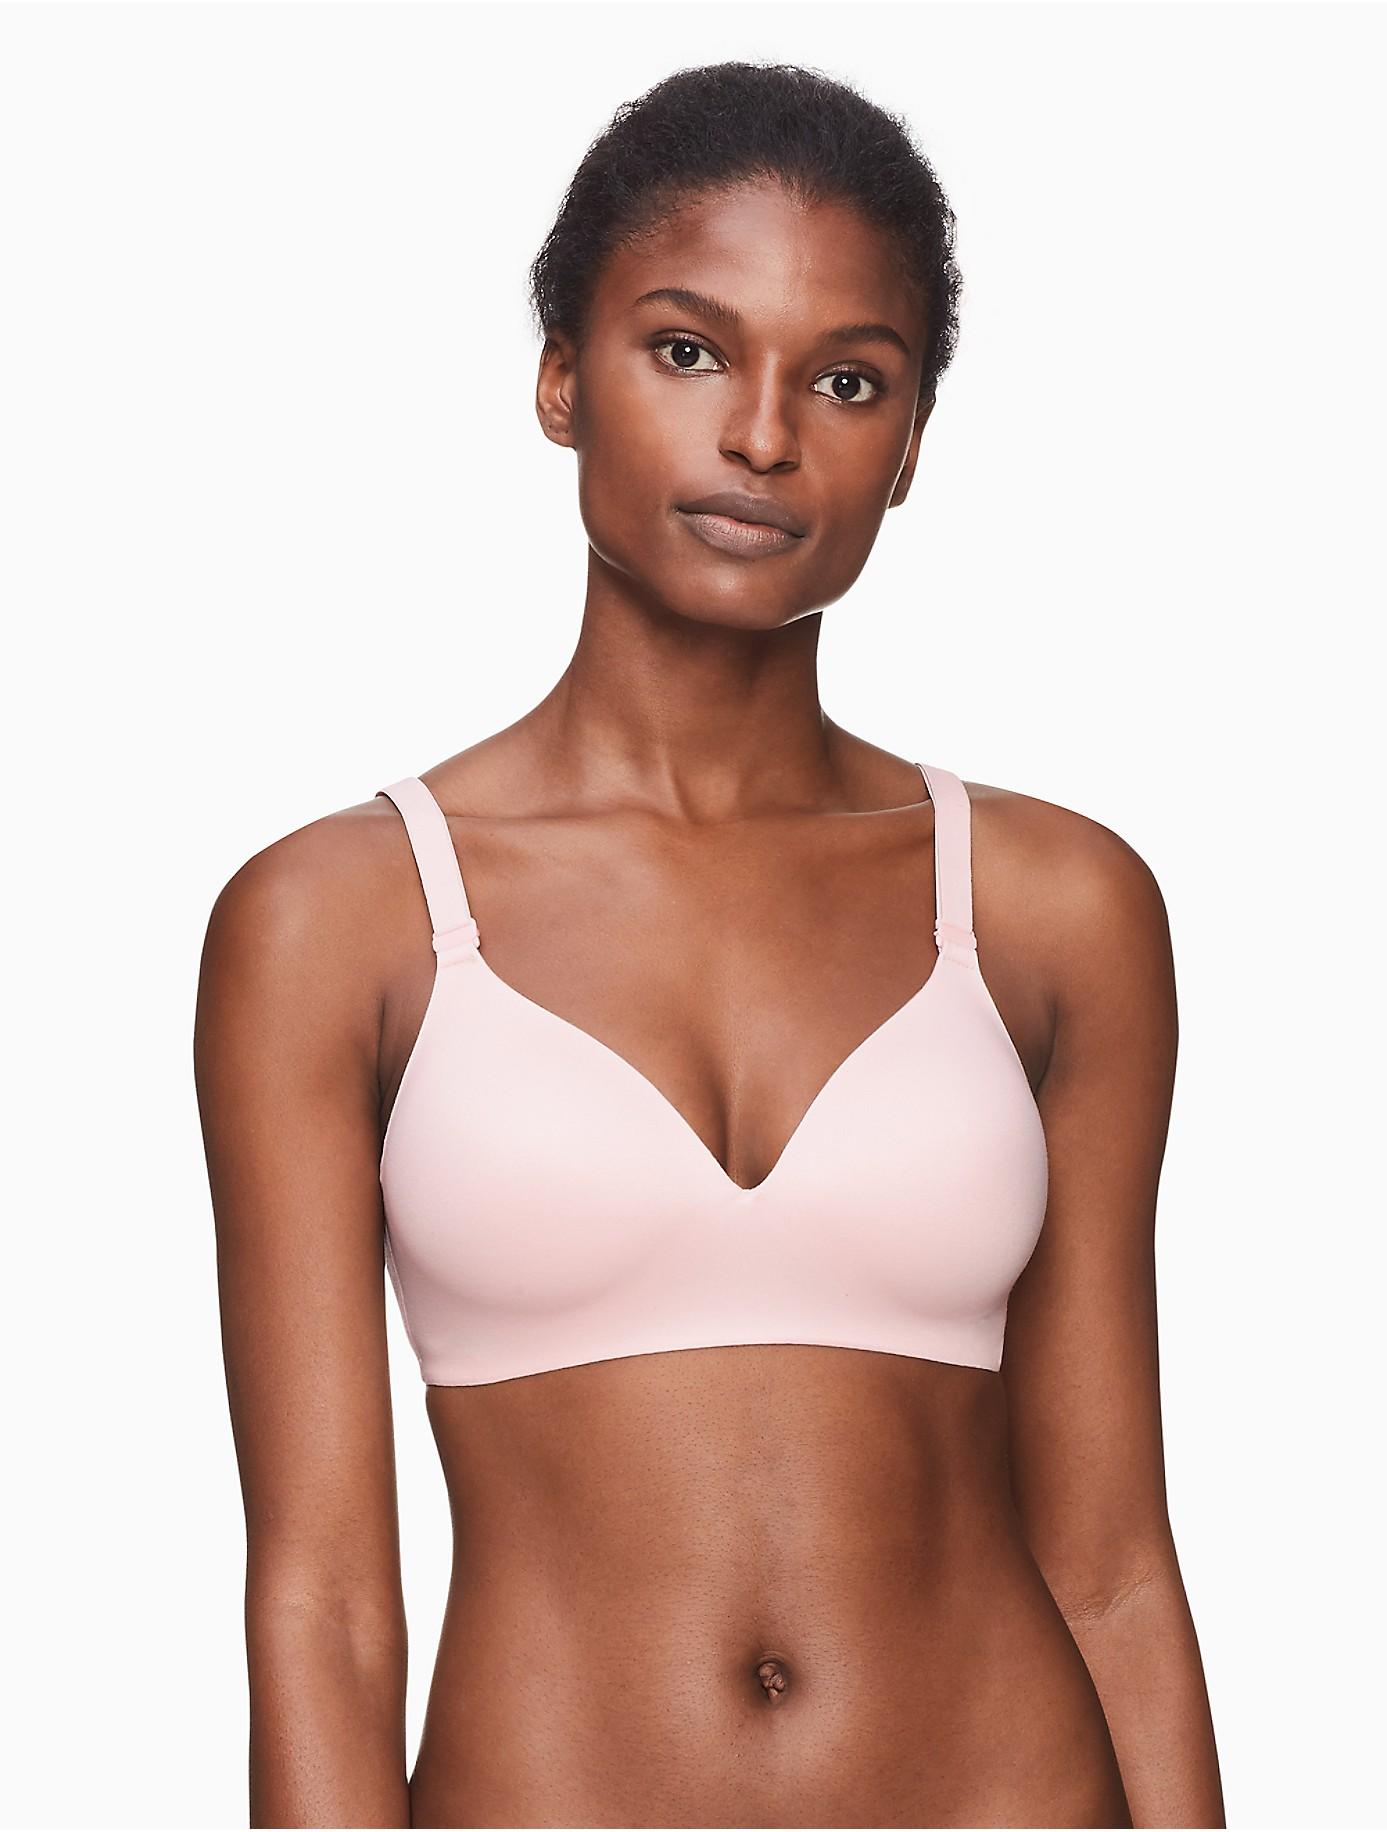 barely there Bra: CustomFlex Fit Lightly Lined Wire-Free Bra 4085 - Women's